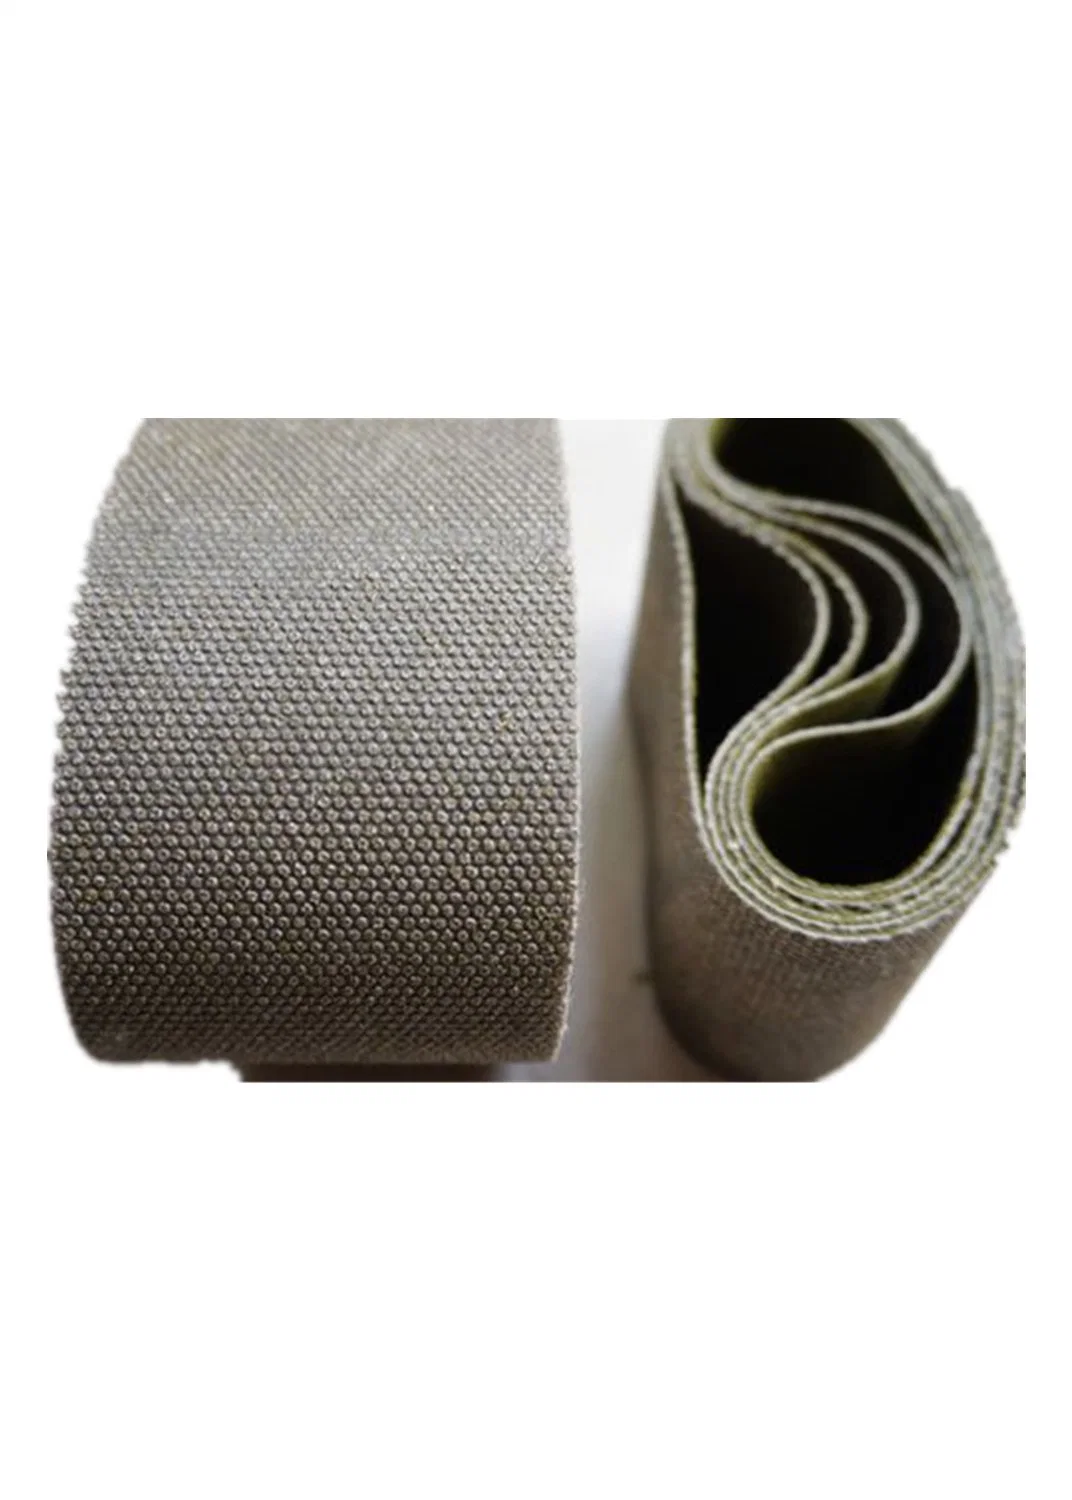 60# Diamond Sanding Belt with Diamond Rough as Hardware Tools for Stone Alloy Wood Tron Stainless Steel Polishing